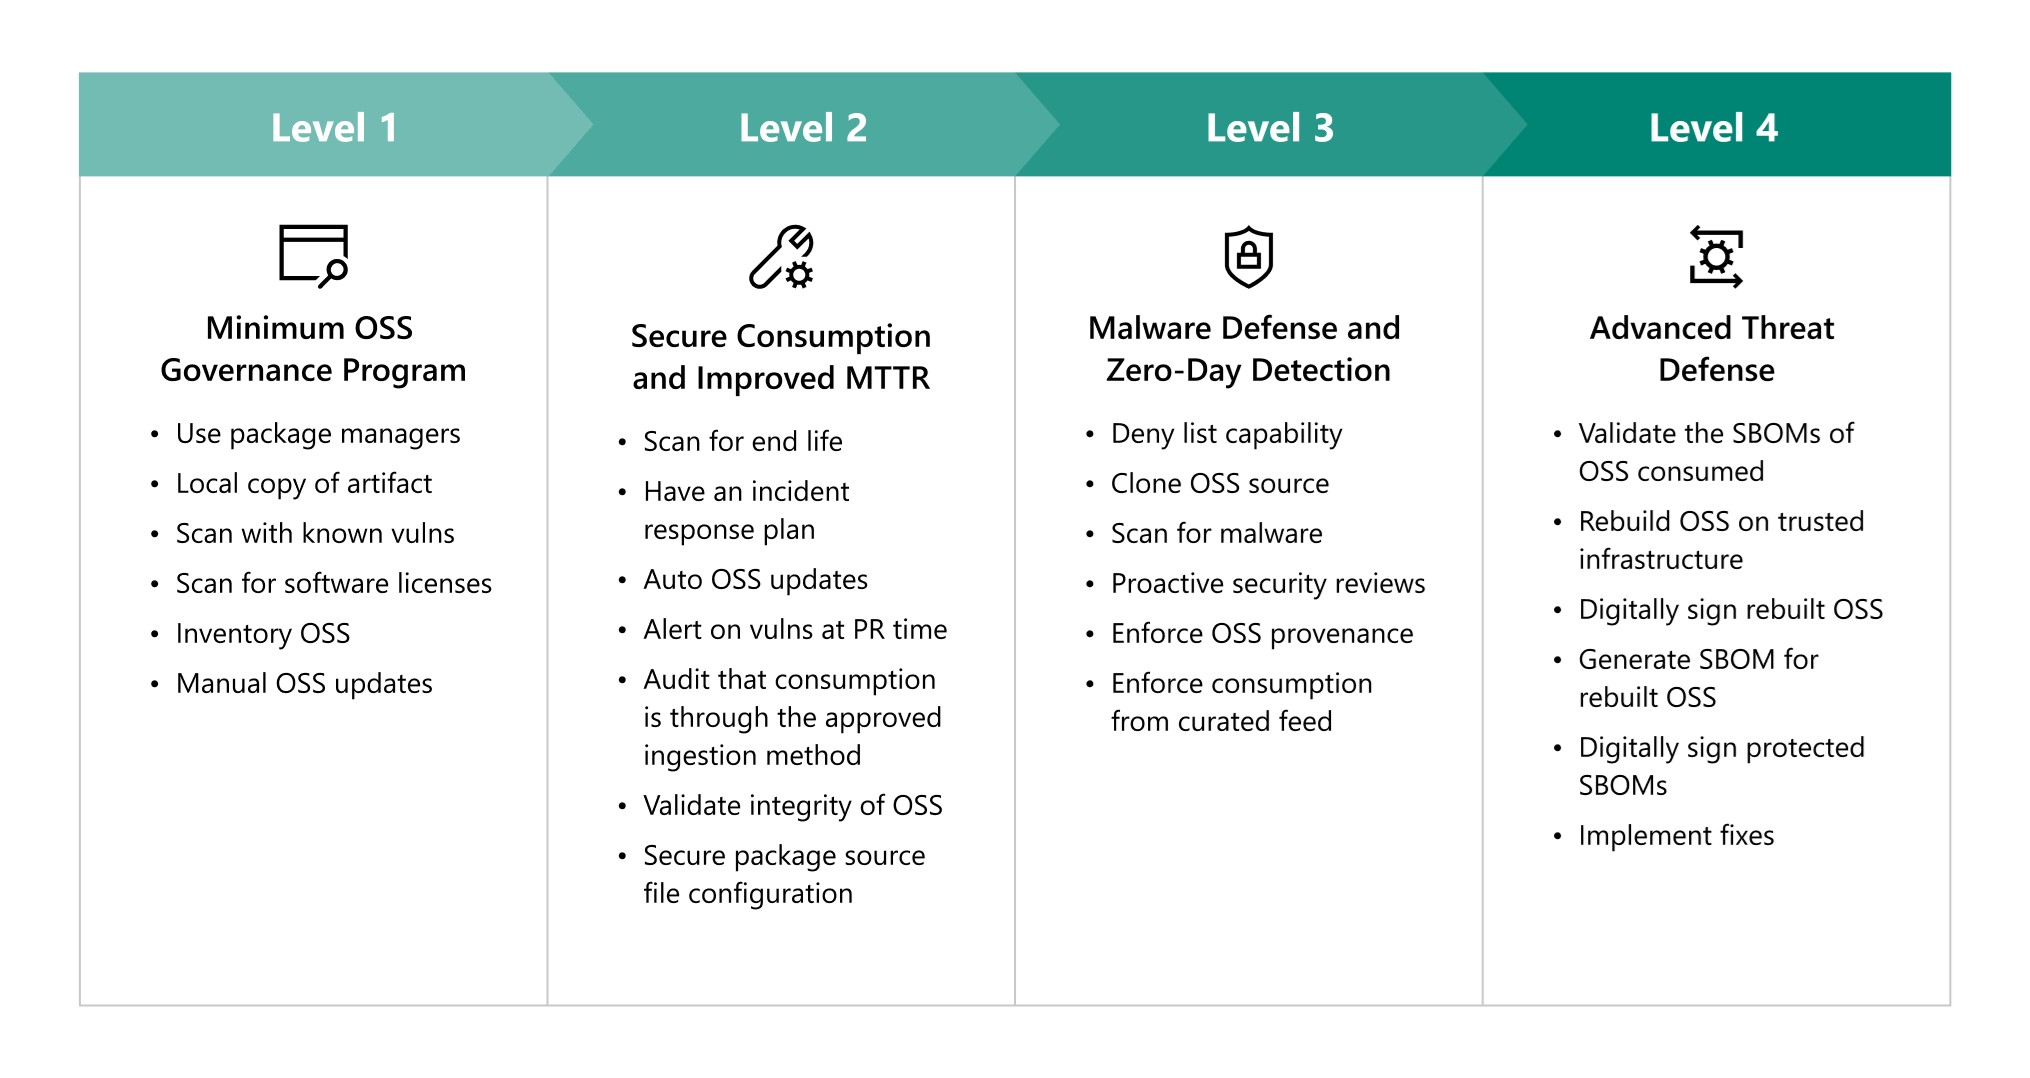 The S2C2F has four levels of maturity. Level 1: running a minimum OSS governance program. Level 2: improving MTTR vulnerabilities. Level 3: adding defenses from compromised OSS. Level 4: mitigating against the most sophisticated adversaries.